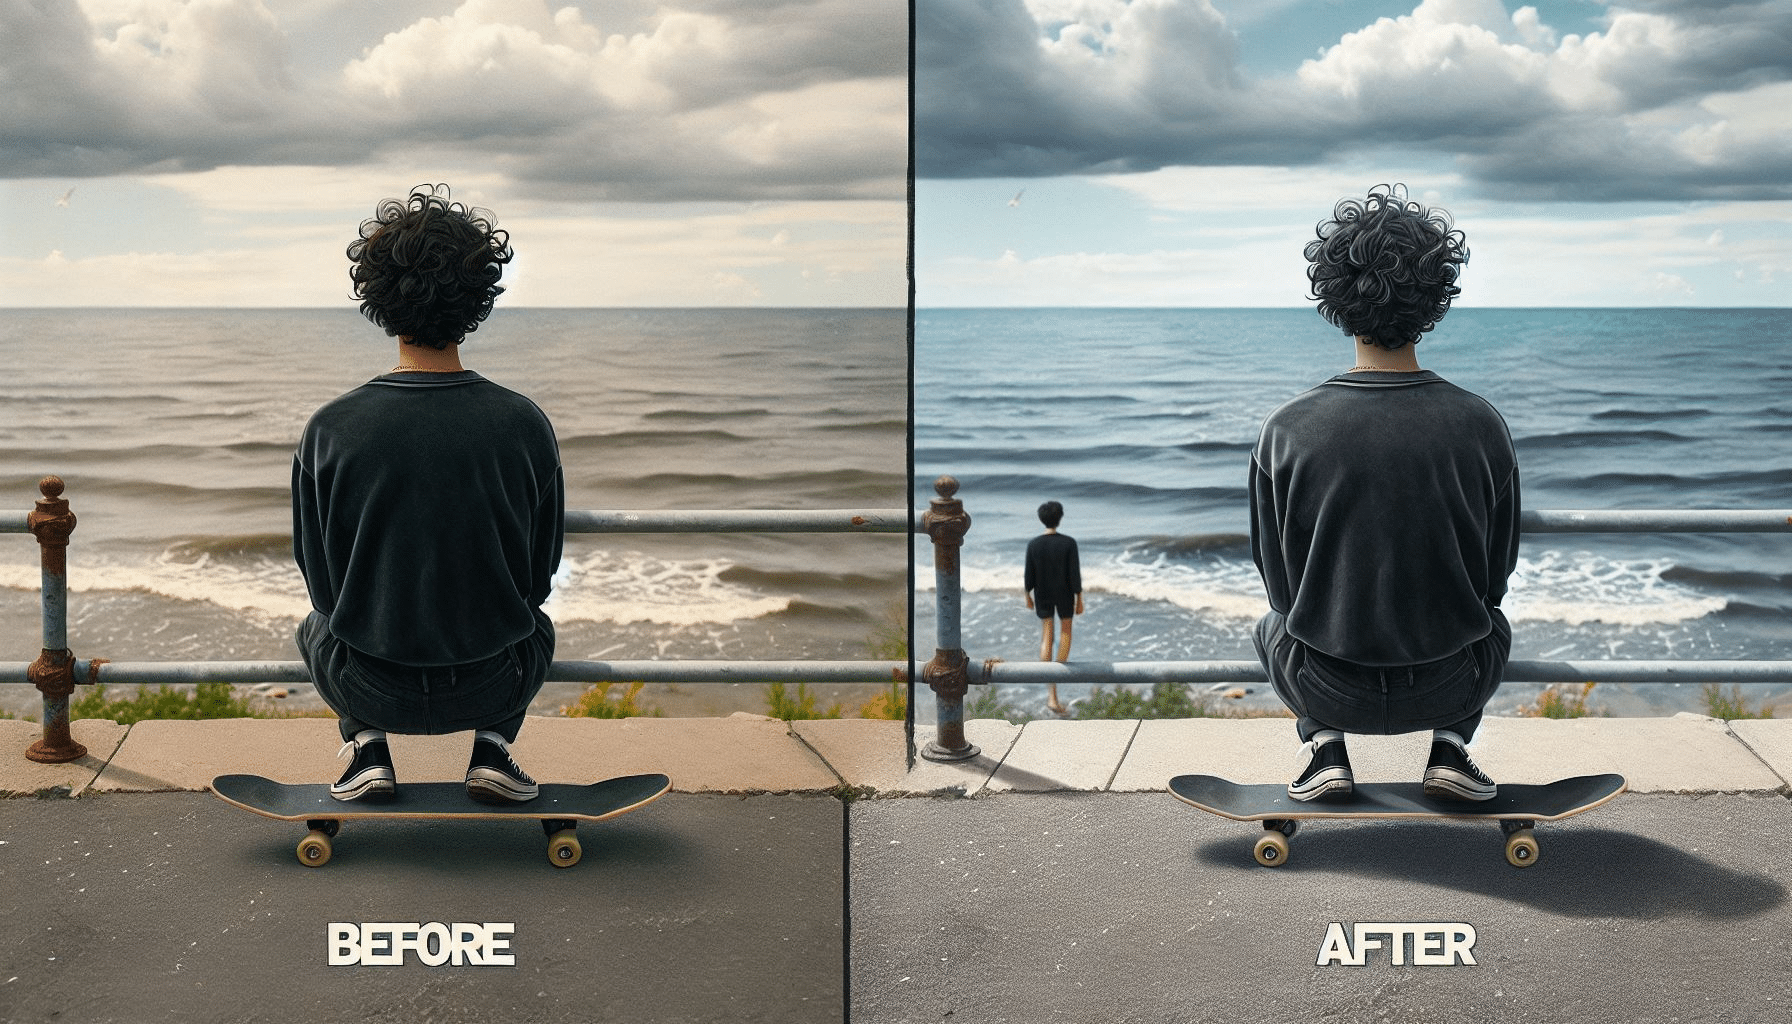 Before and After comparison of a beachfront scene with Photo Eraser edits. ‘Before’ shows a person on a skateboard with another figure in the background; ‘After’ shows the same scene with the figure removed.